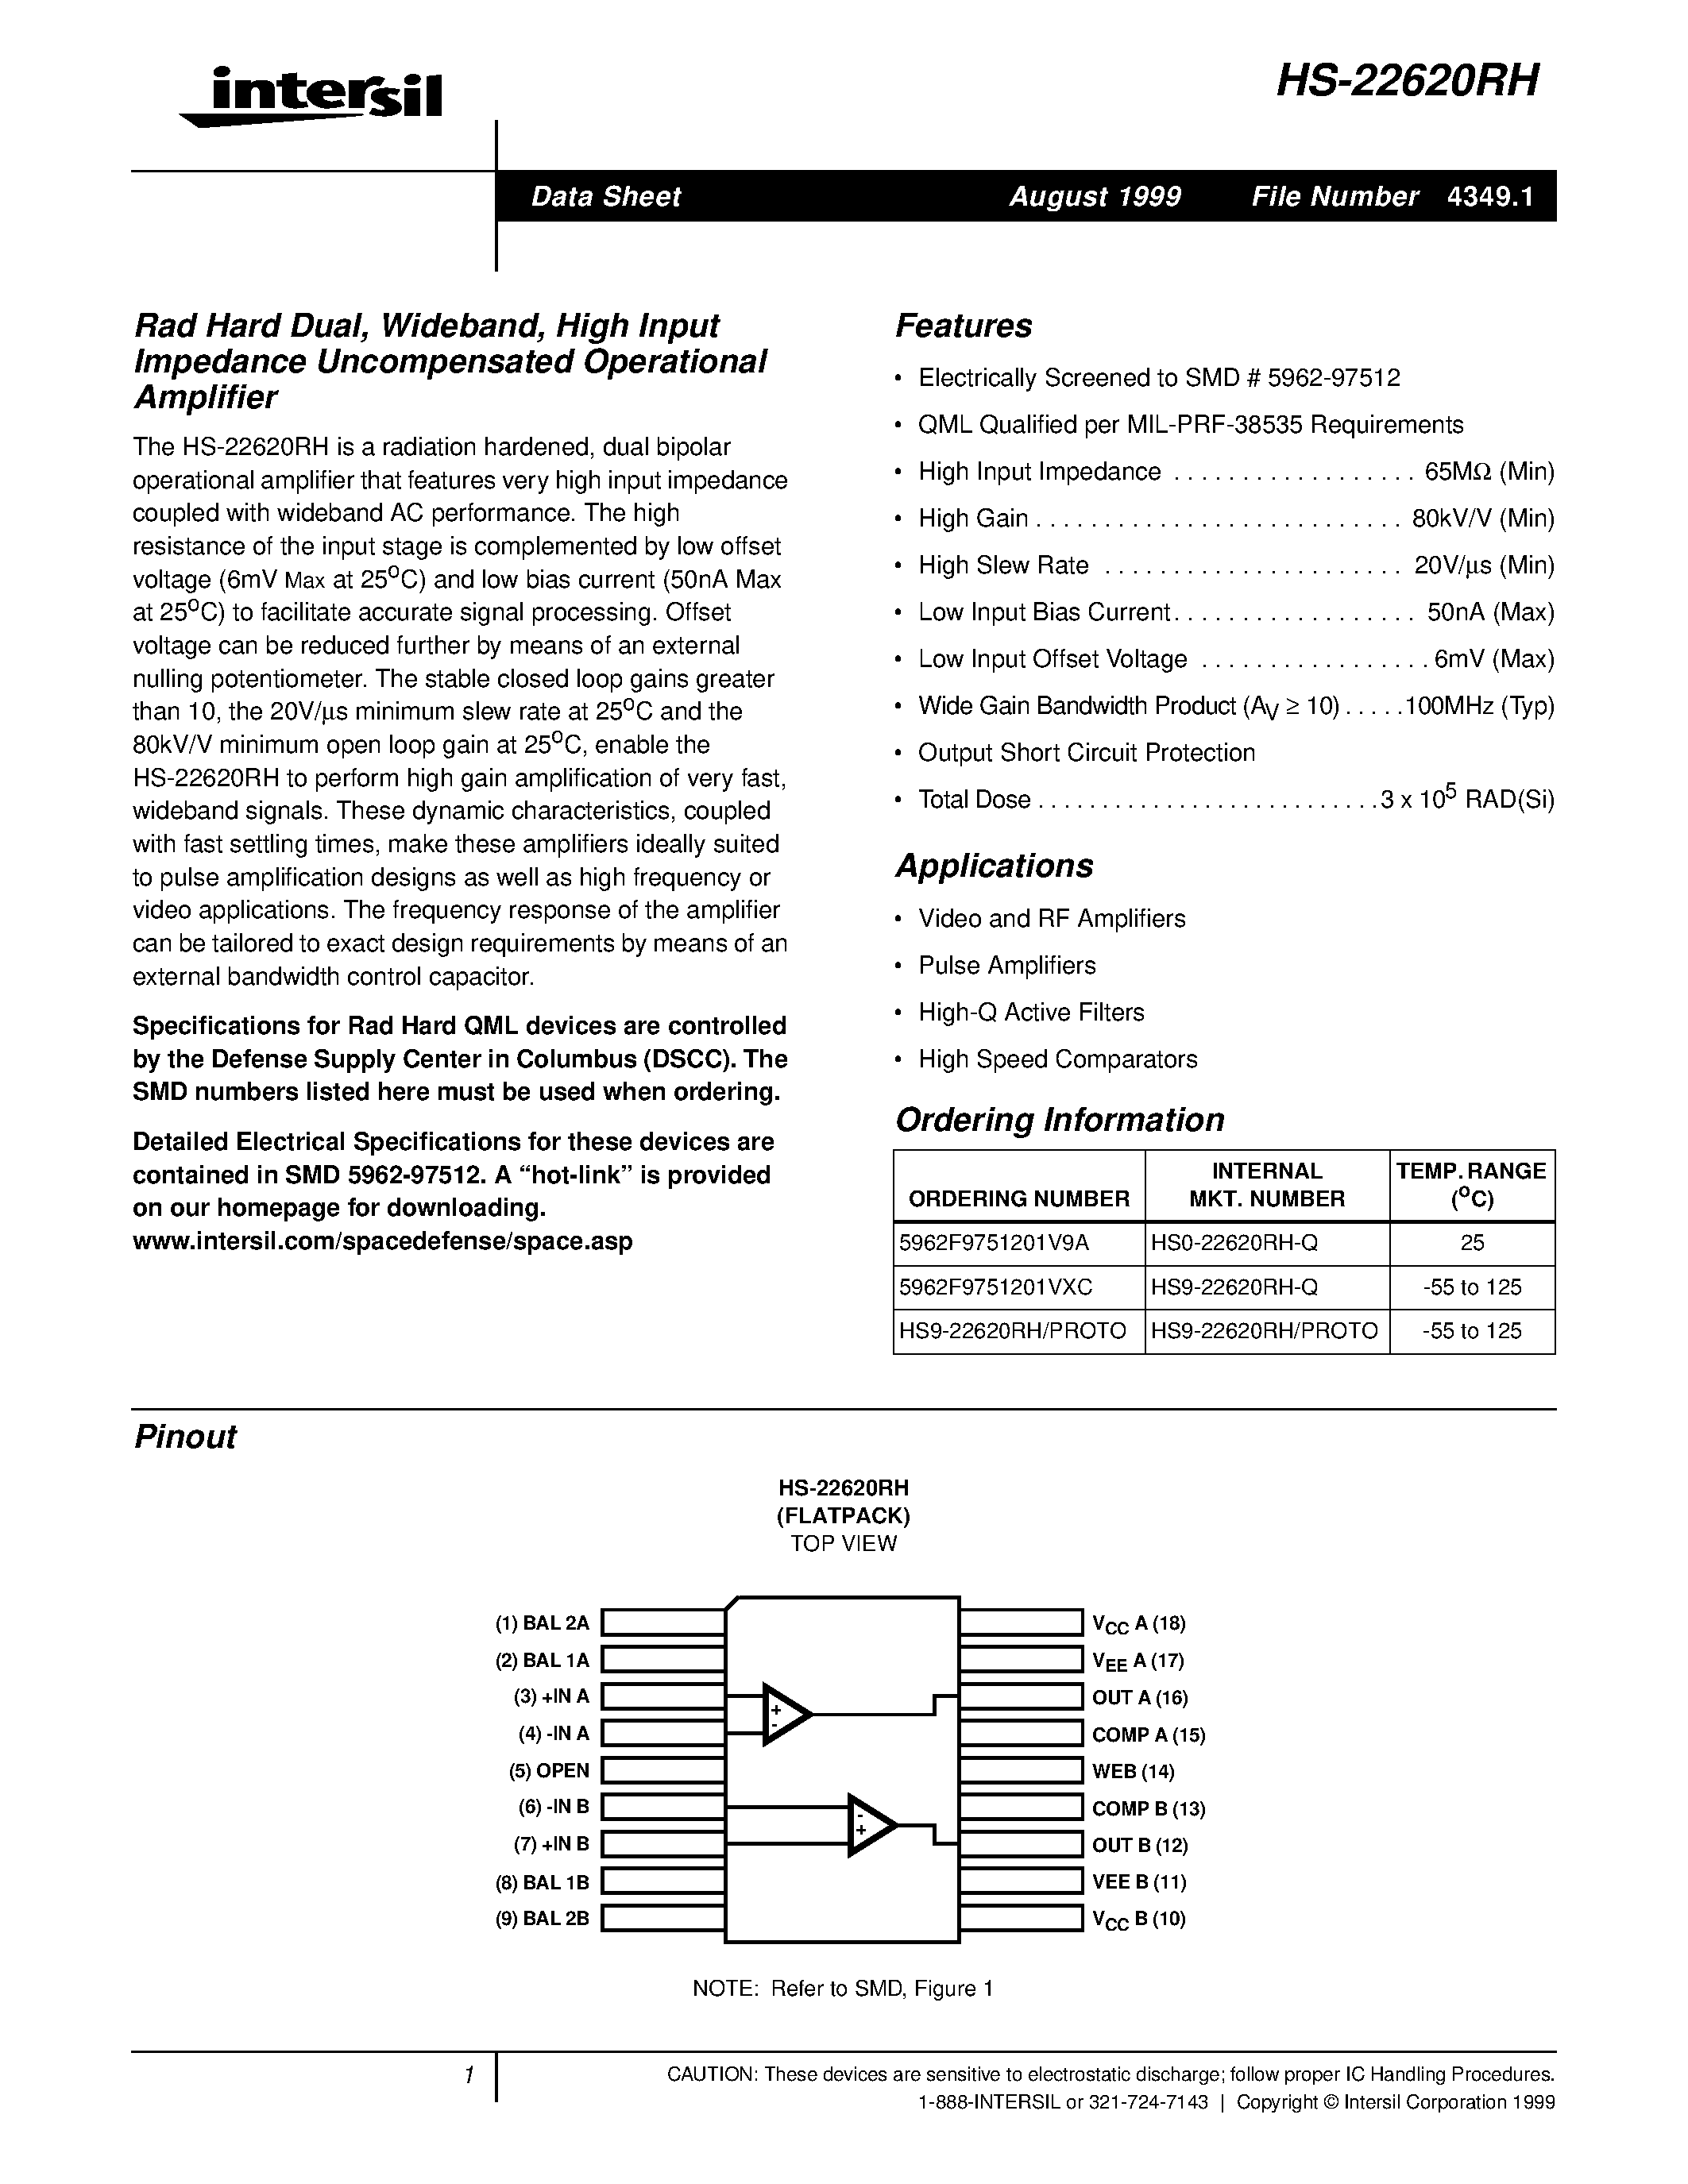 Datasheet HS0-22620RH-Q - Rad Hard Dual/ Wideband/ High Input Impedance Uncompensated Operational Amplifier page 1